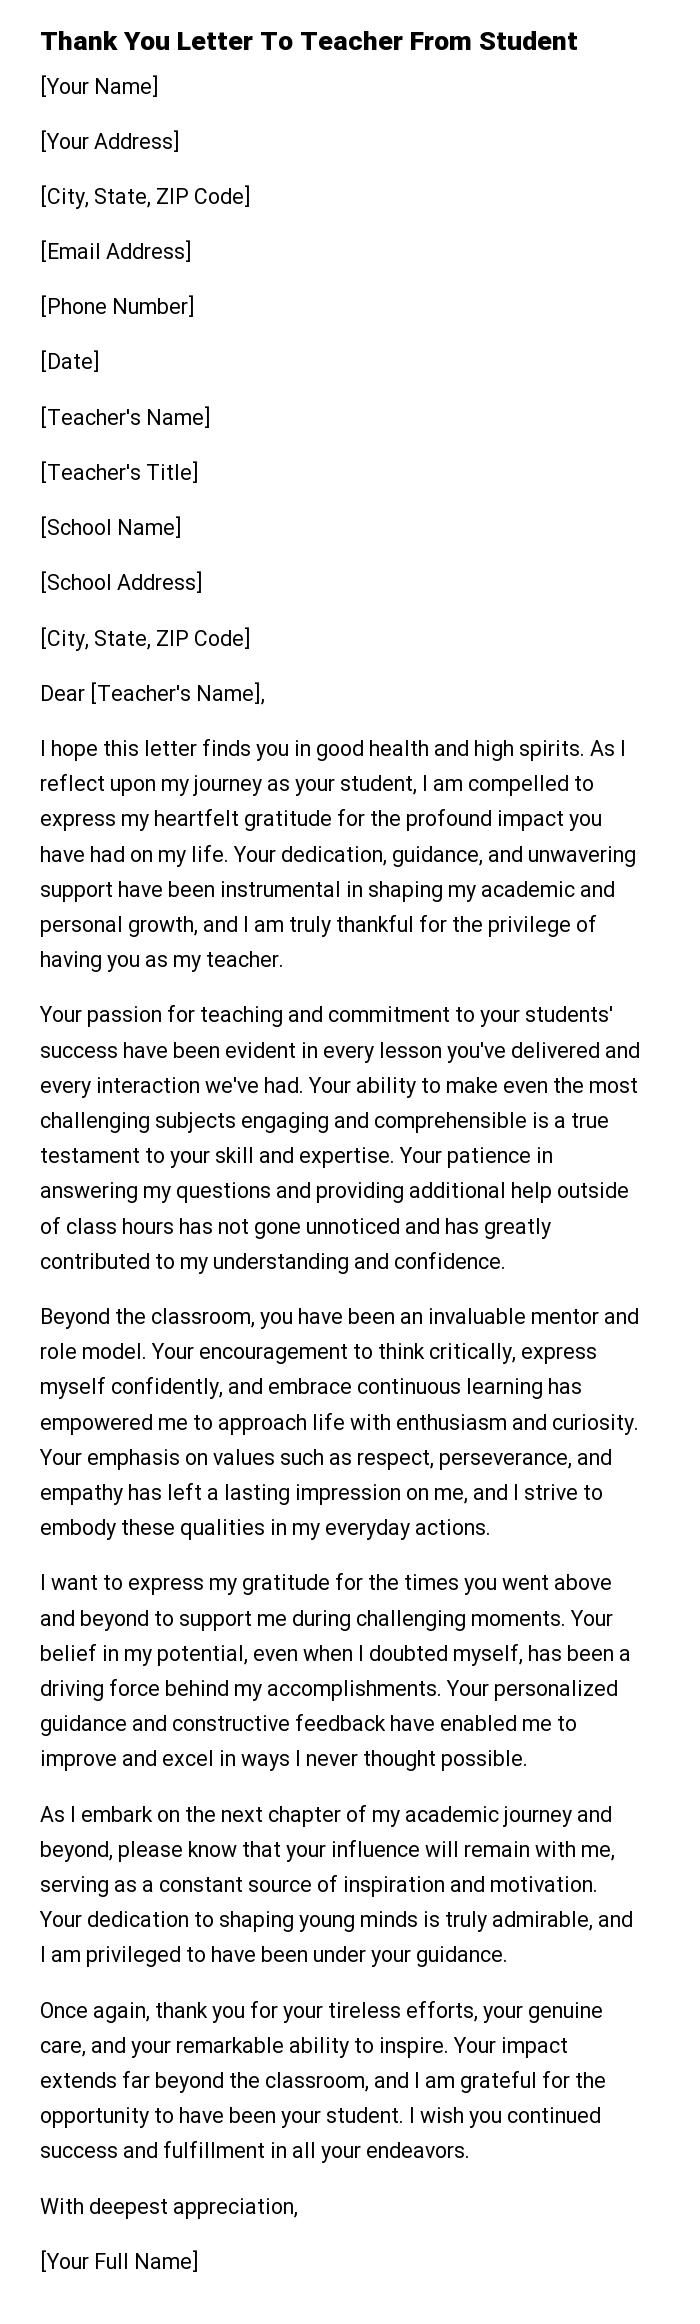 Thank You Letter To Teacher From Student